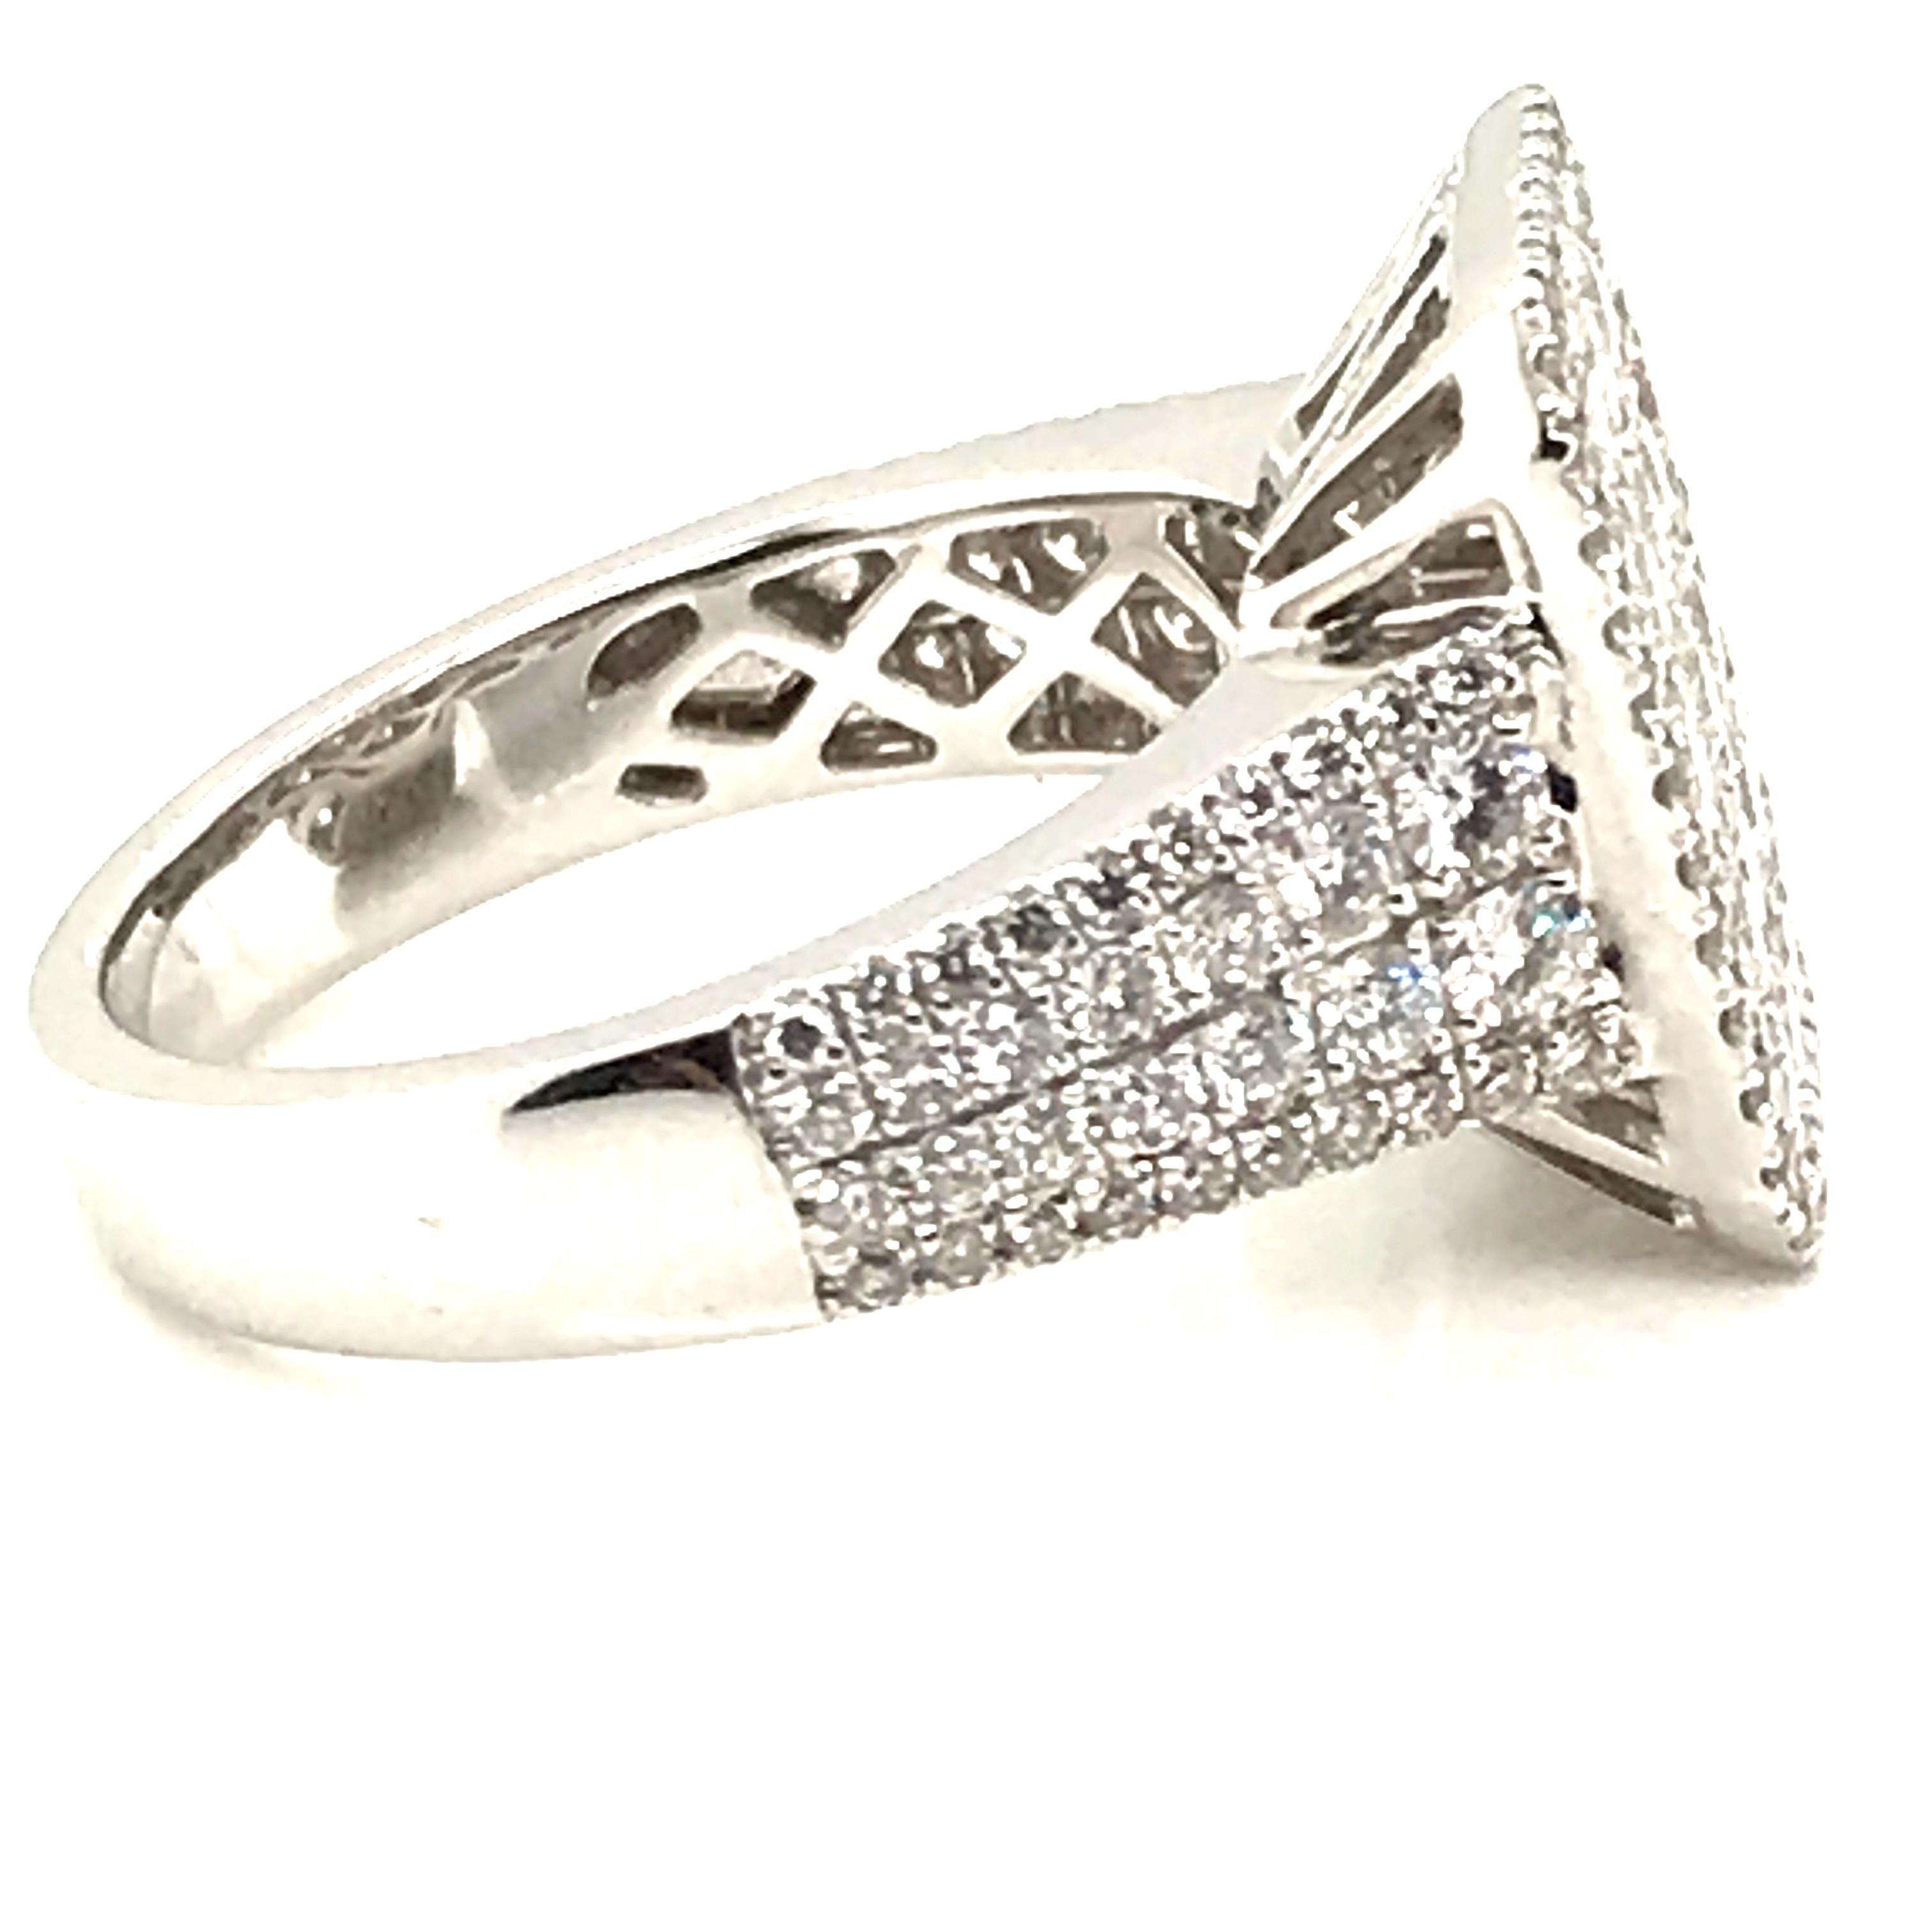 2.09 Carat Facet White Diamond Ring with 18 Karat White Gold In New Condition For Sale In New York, NY